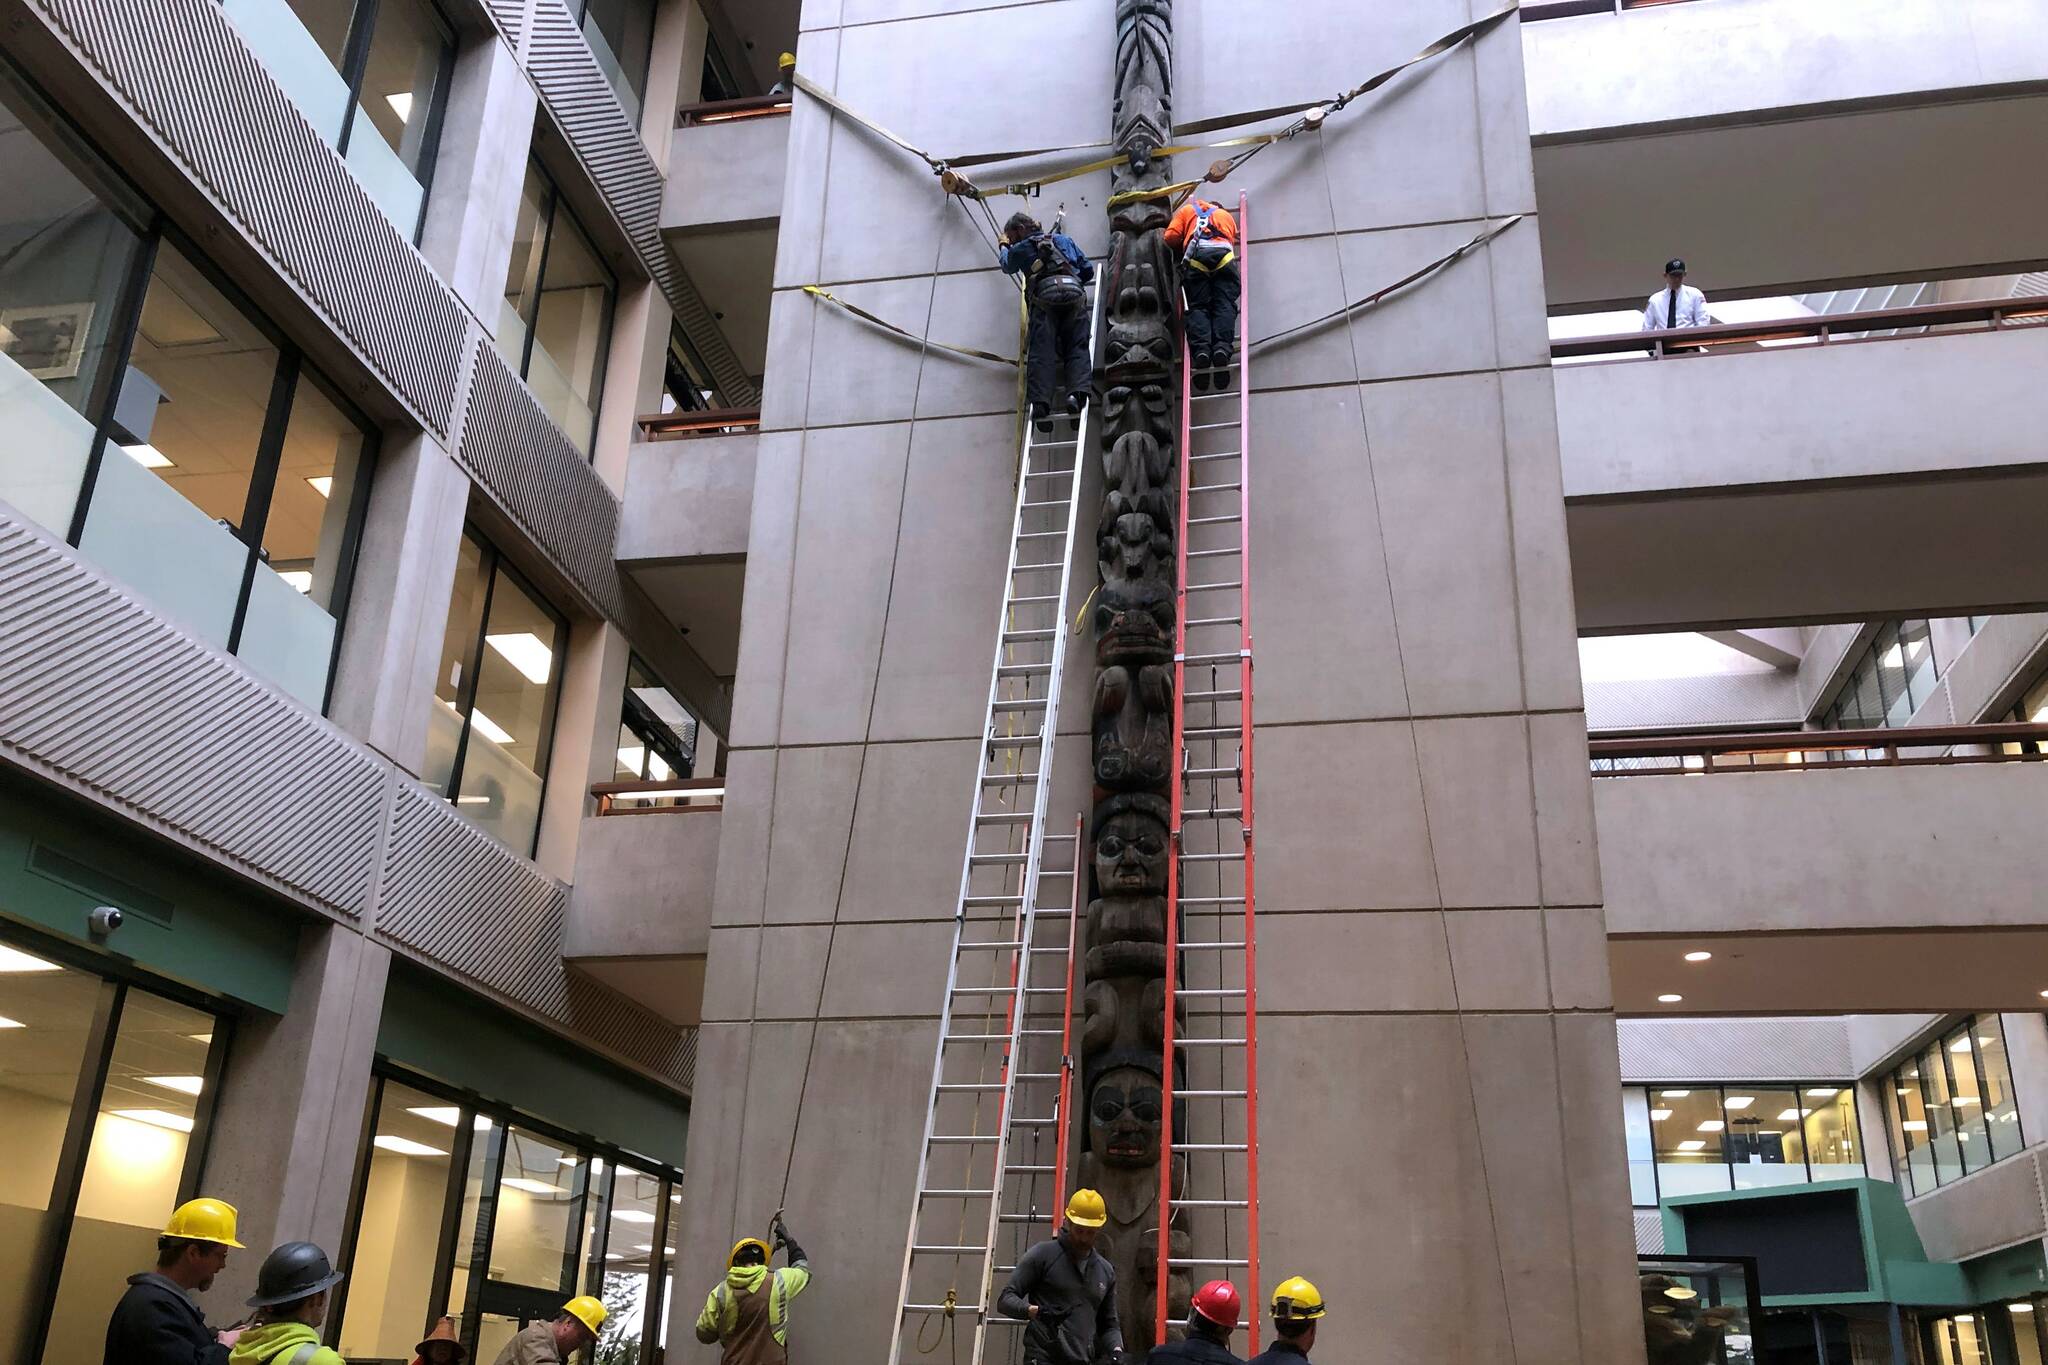 Peter Segall / Juneau Empire 
The Wooshkeetaan Kootéeyaa totem pole was re-installed at its new home in the attrium of the State Office Building on Friday, March 11, 2022. Workers from Alaska Electric Light and Power helped install the pole.